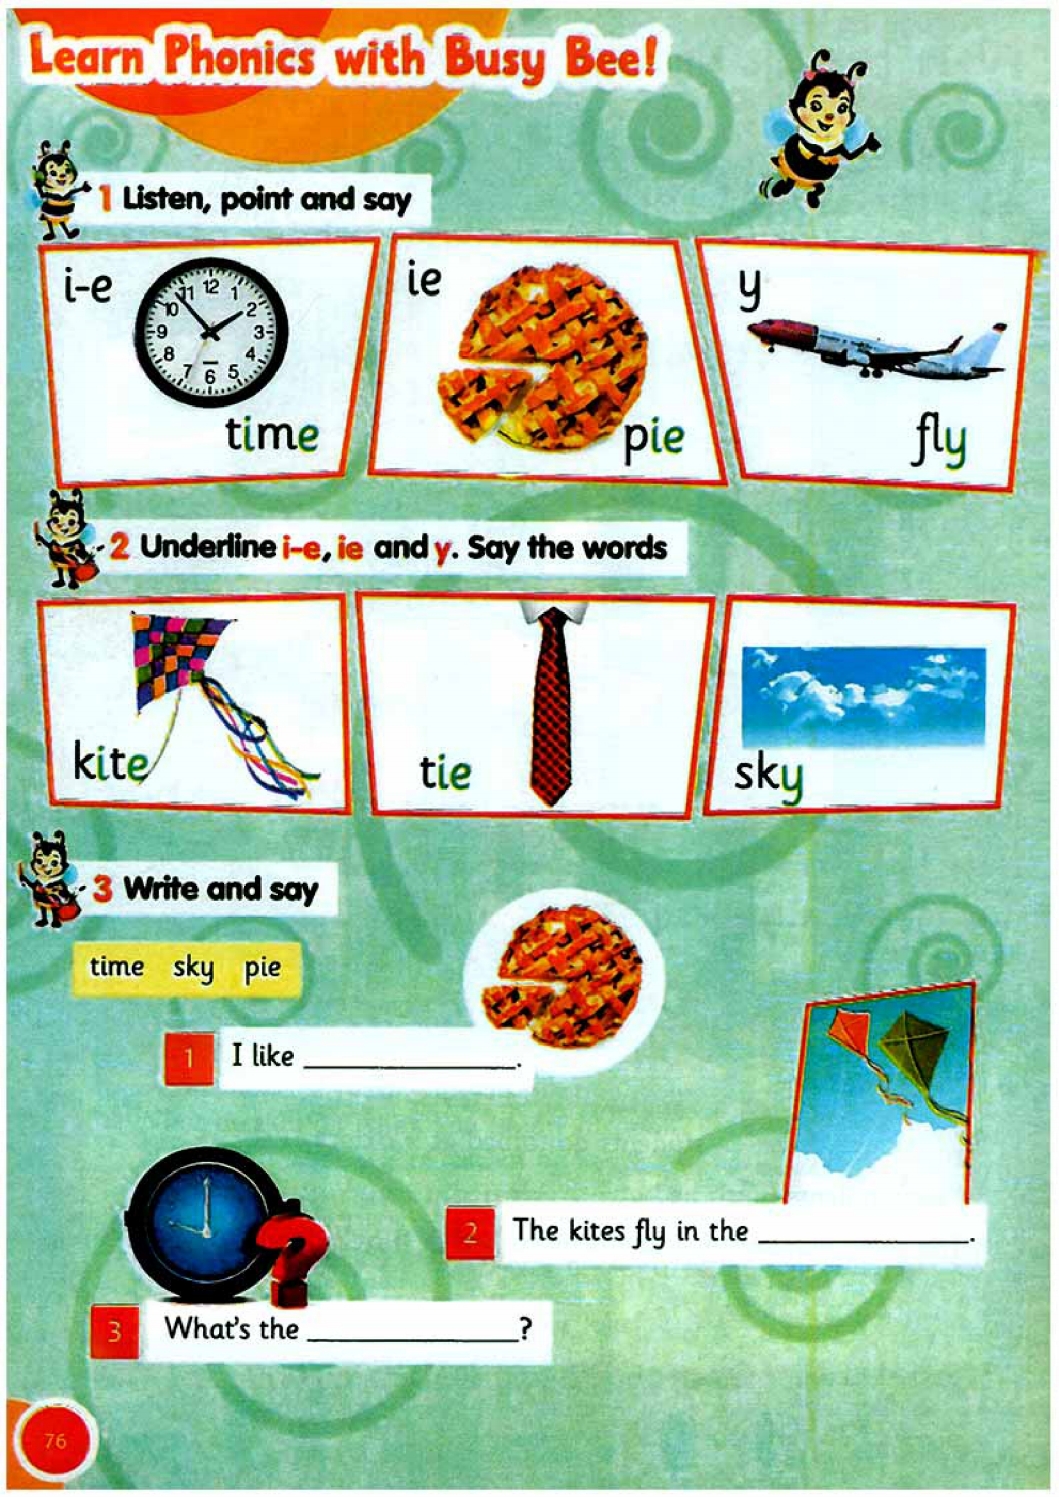 Learn Phonics with Busy Bee